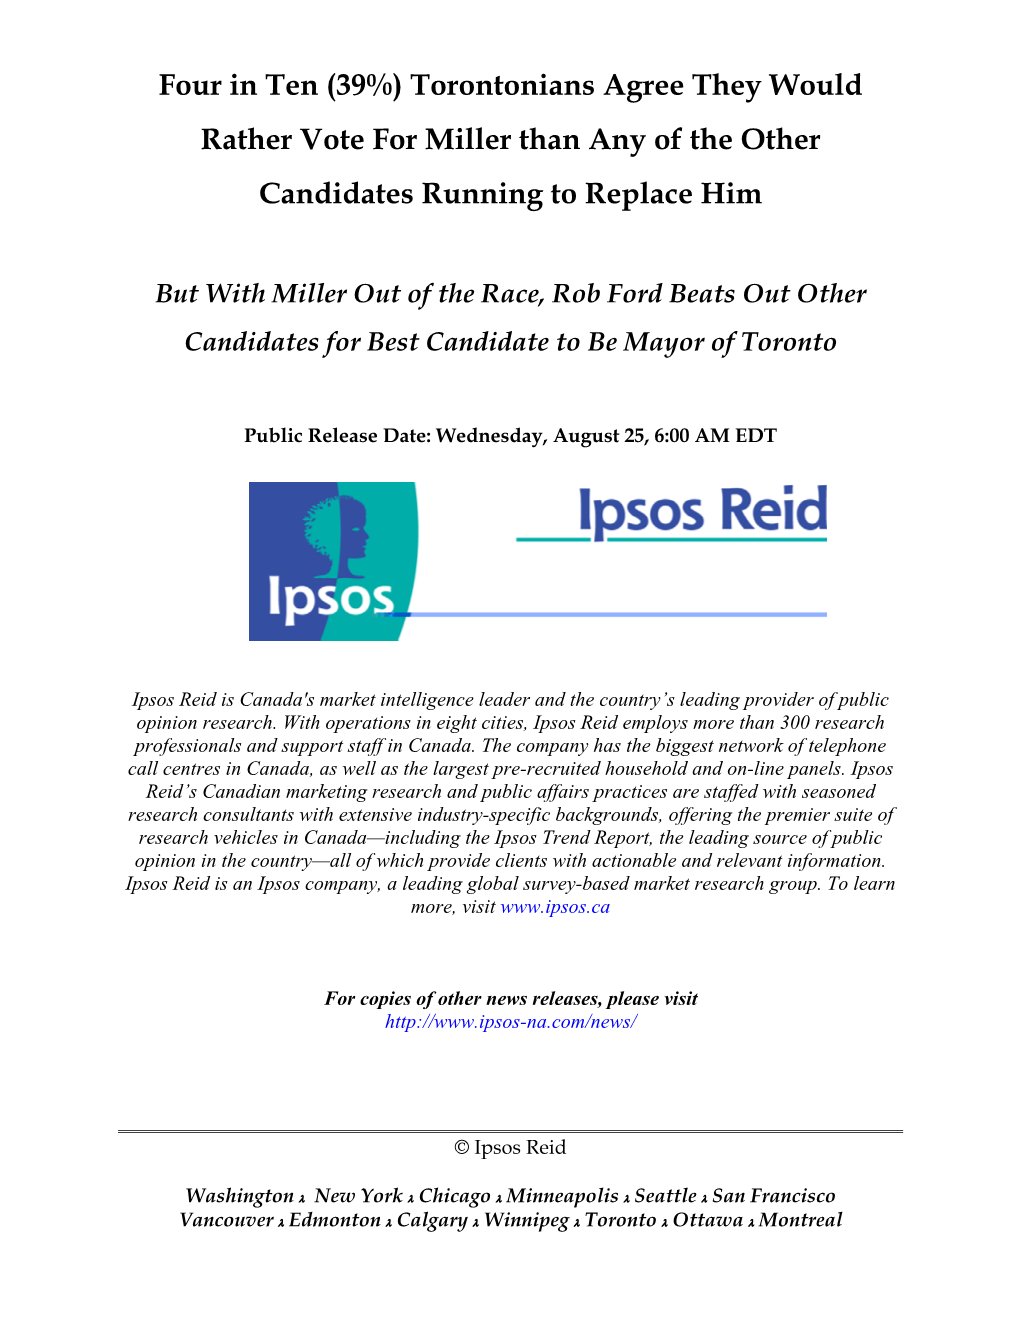 (39%) Torontonians Agree They Would Rather Vote for Miller Than Any of the Other Candidates Running to Replace Him